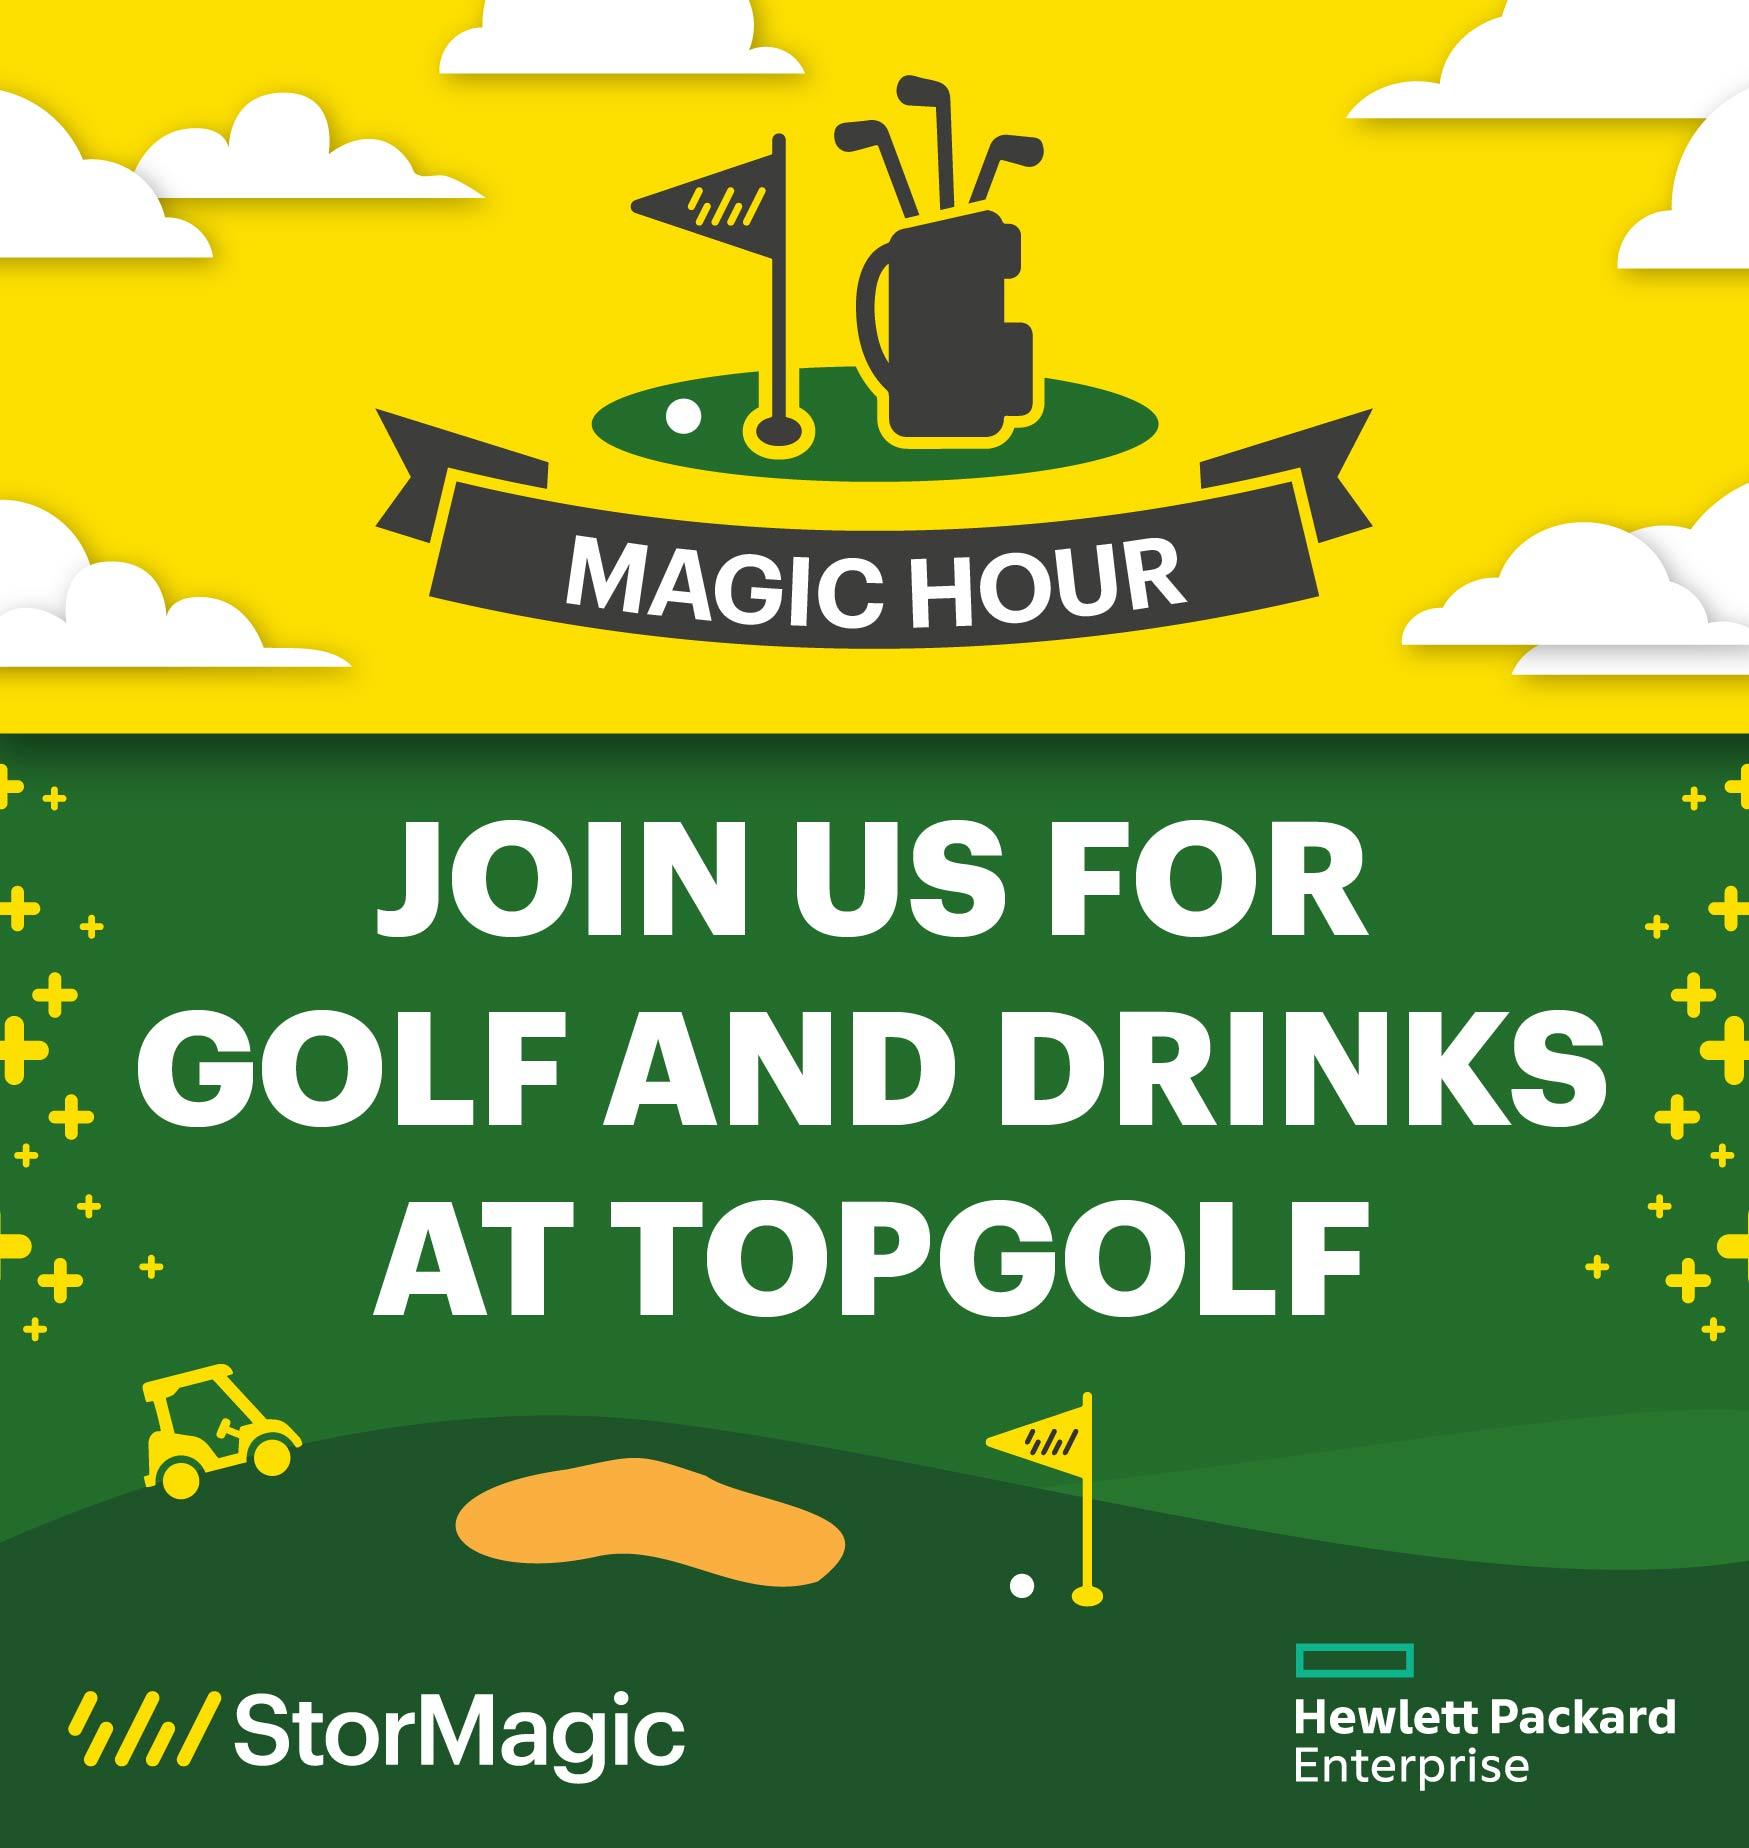 Top Golf with StorMagic and HPE